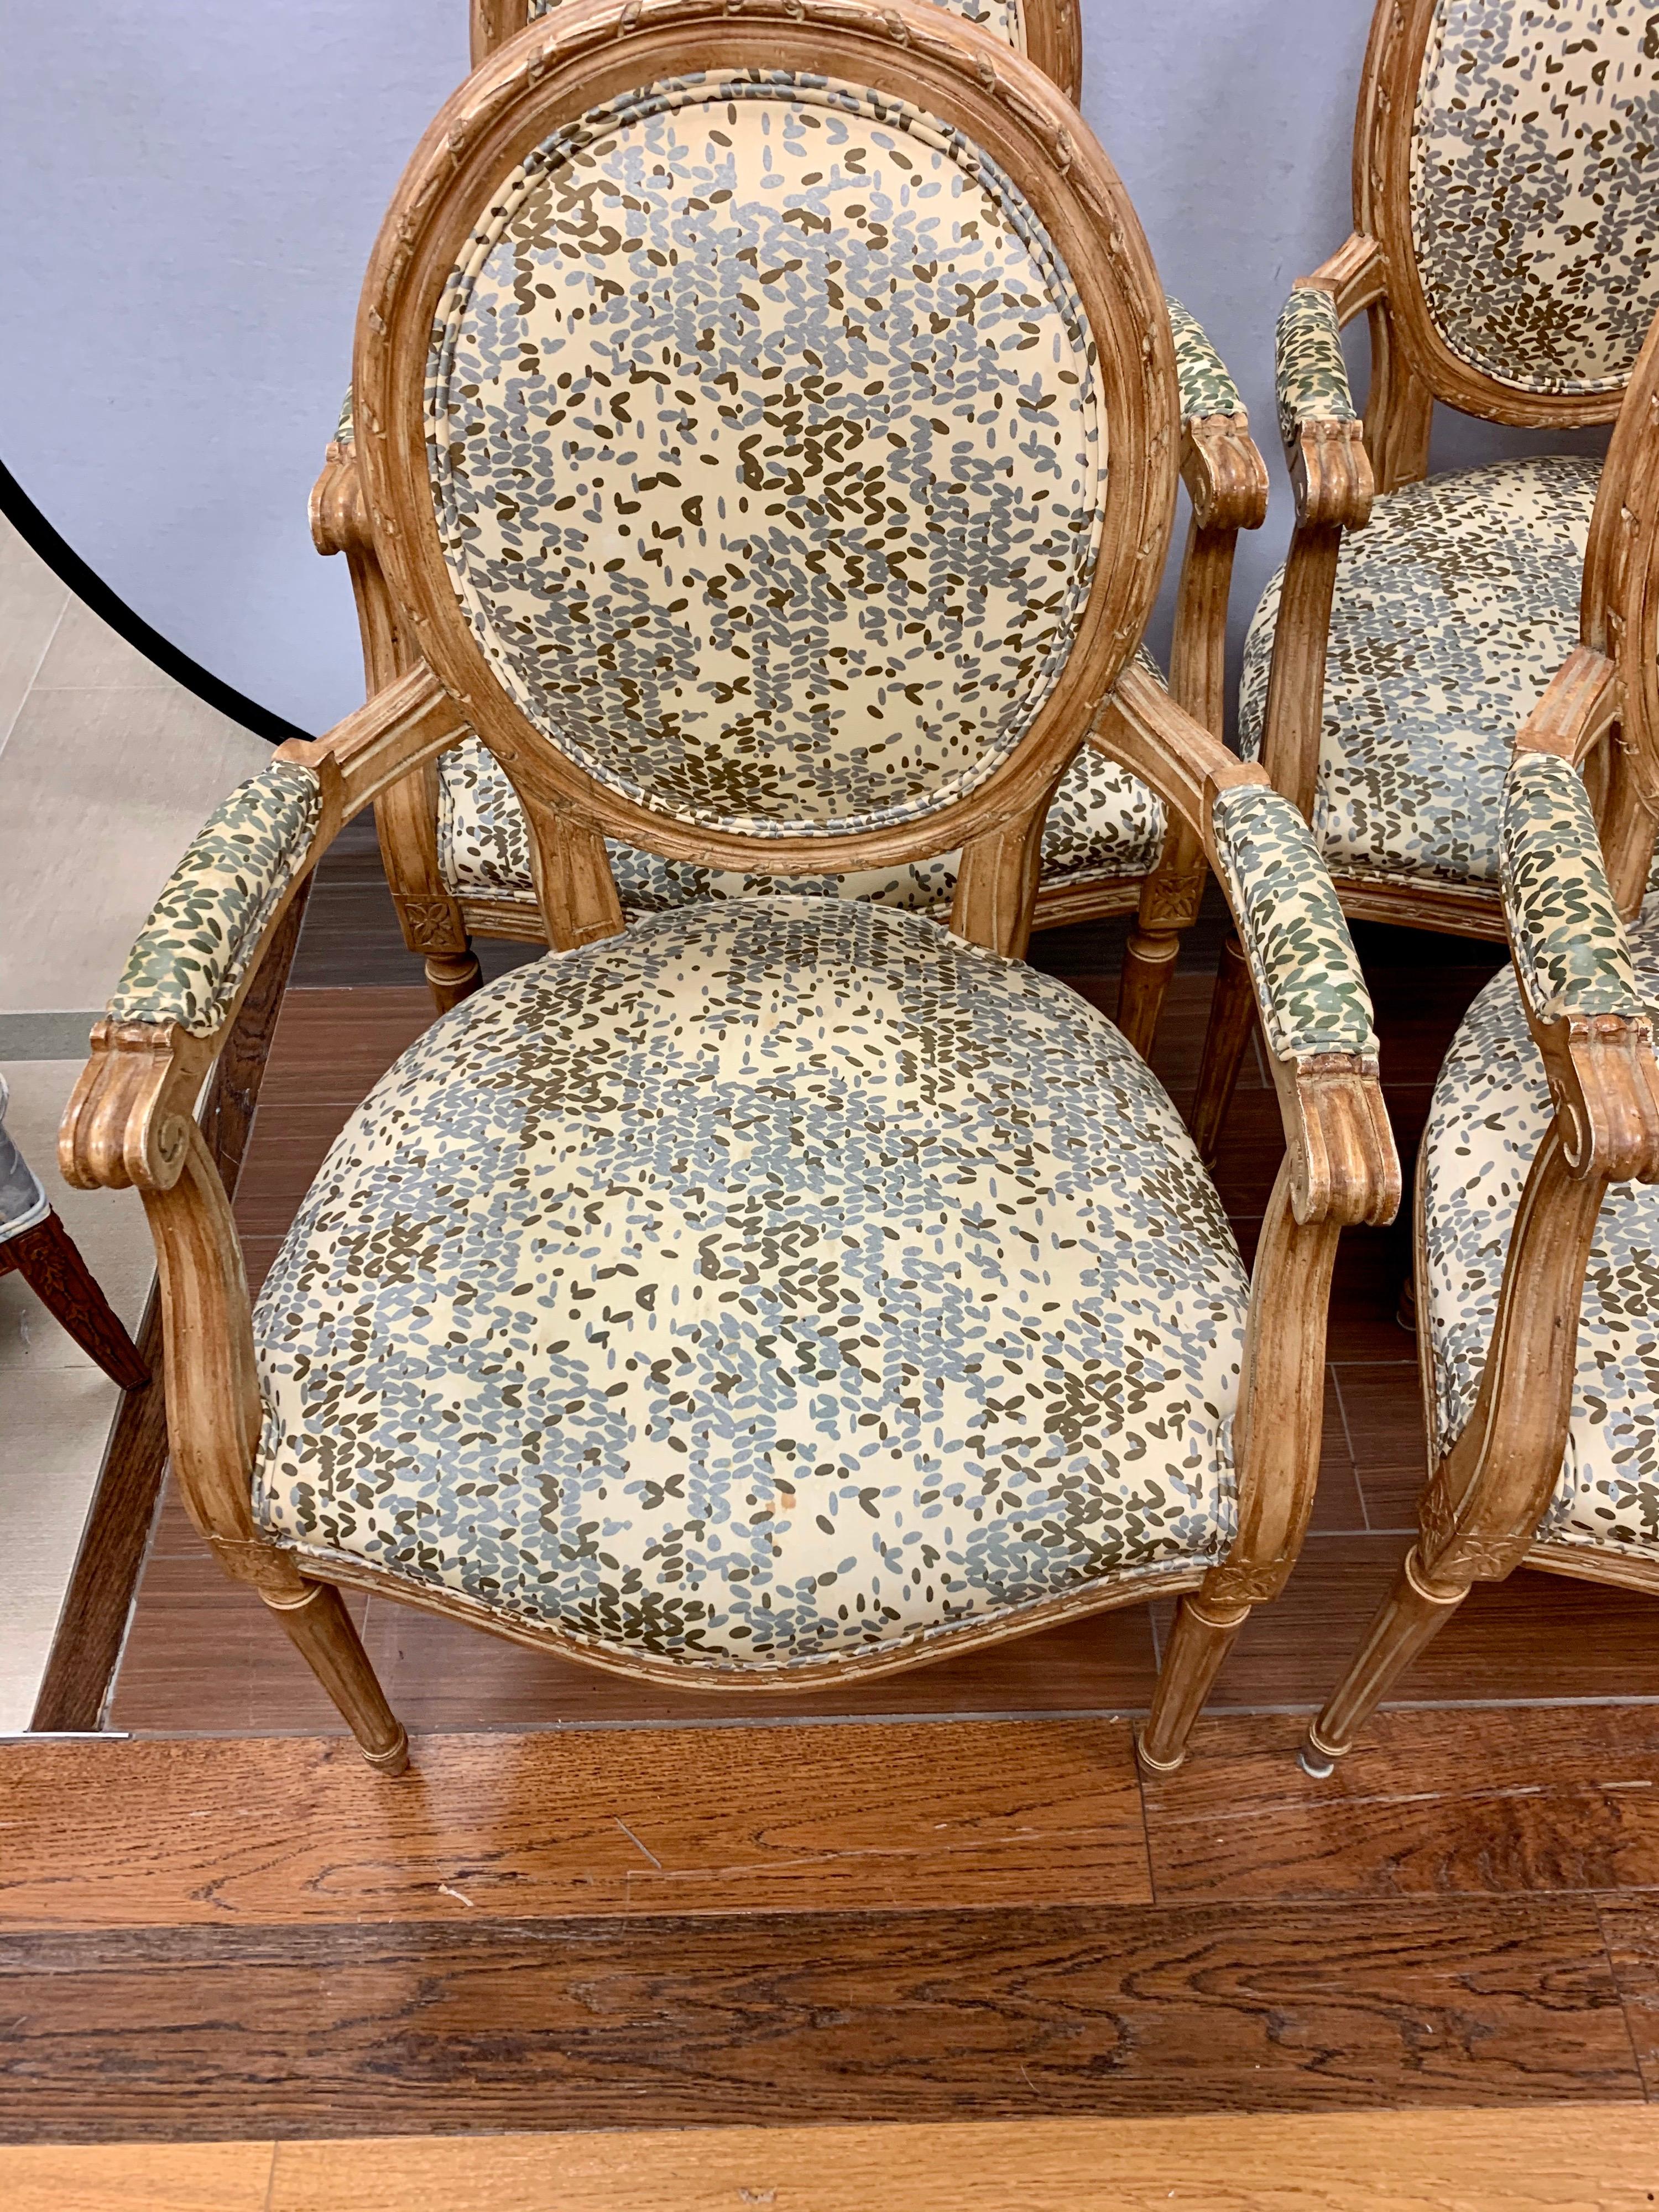 Coveted pair of Louis XVI oval back armchairs with Kravet fabric. The carvings throughout the fruitwood are intricate yet tasteful. The upholstery is at seat, backrest and armrests. All dimensions are below. Both chairs are matching armchairs.